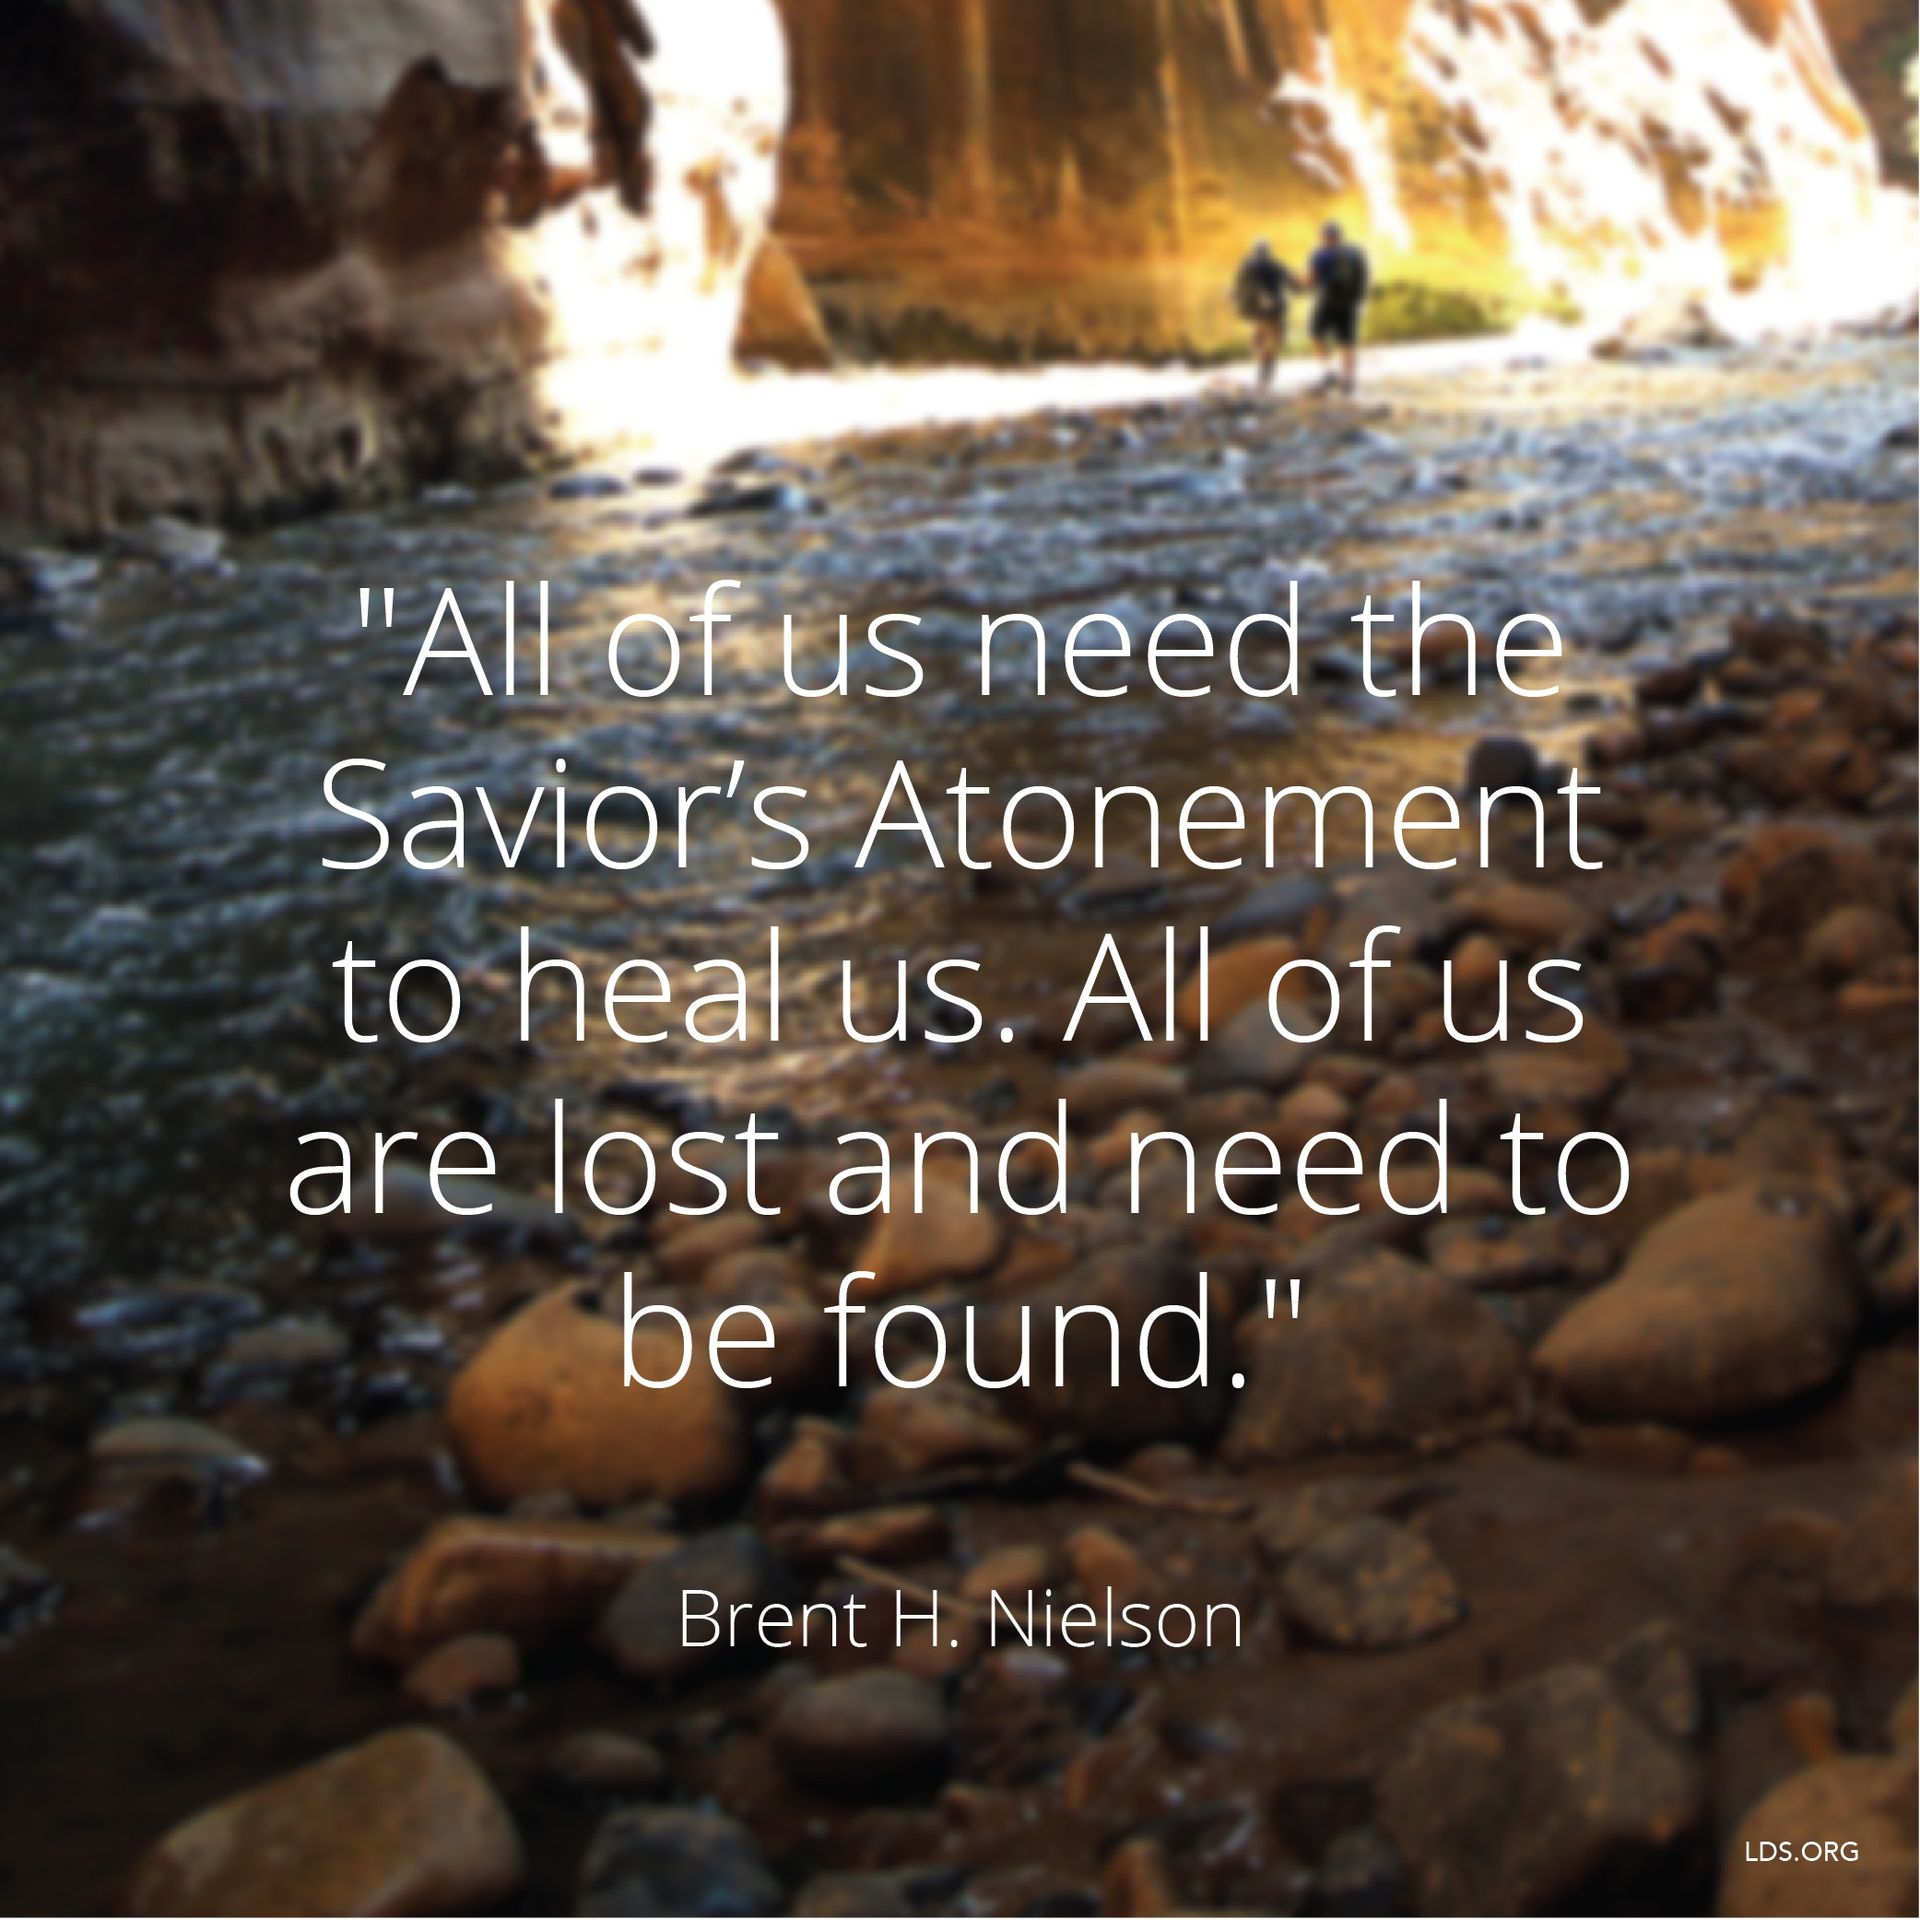 “All of us need the Savior’s Atonement to heal us. All of us are lost and need to be found.”—Elder Brent H. Nielson, “Waiting for the Prodigal” © undefined ipCode 1.